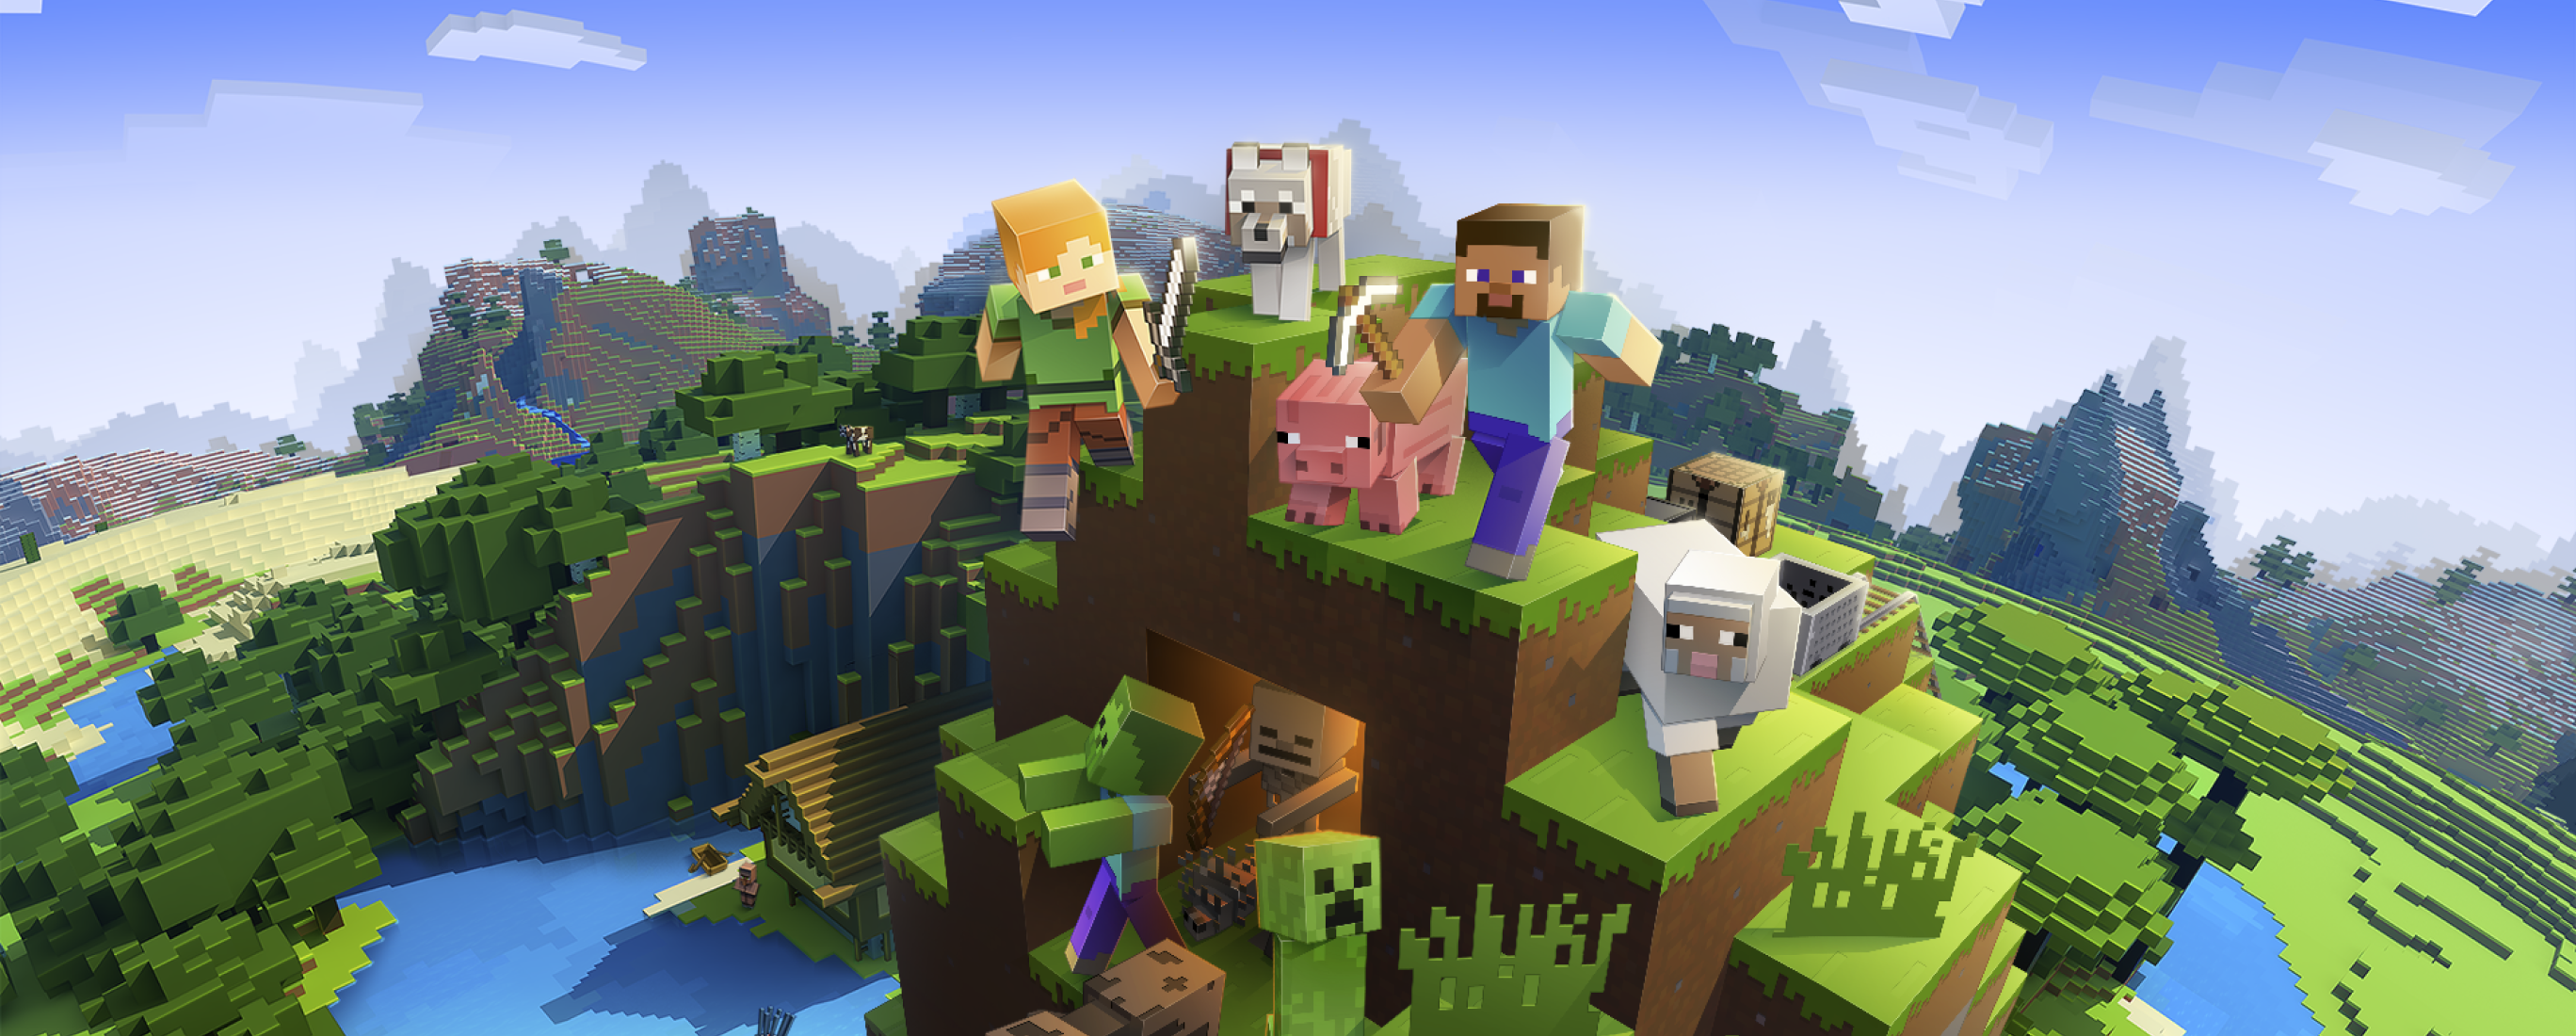 Minecraft game characters standing together with a pig, sheep, and some creepers.